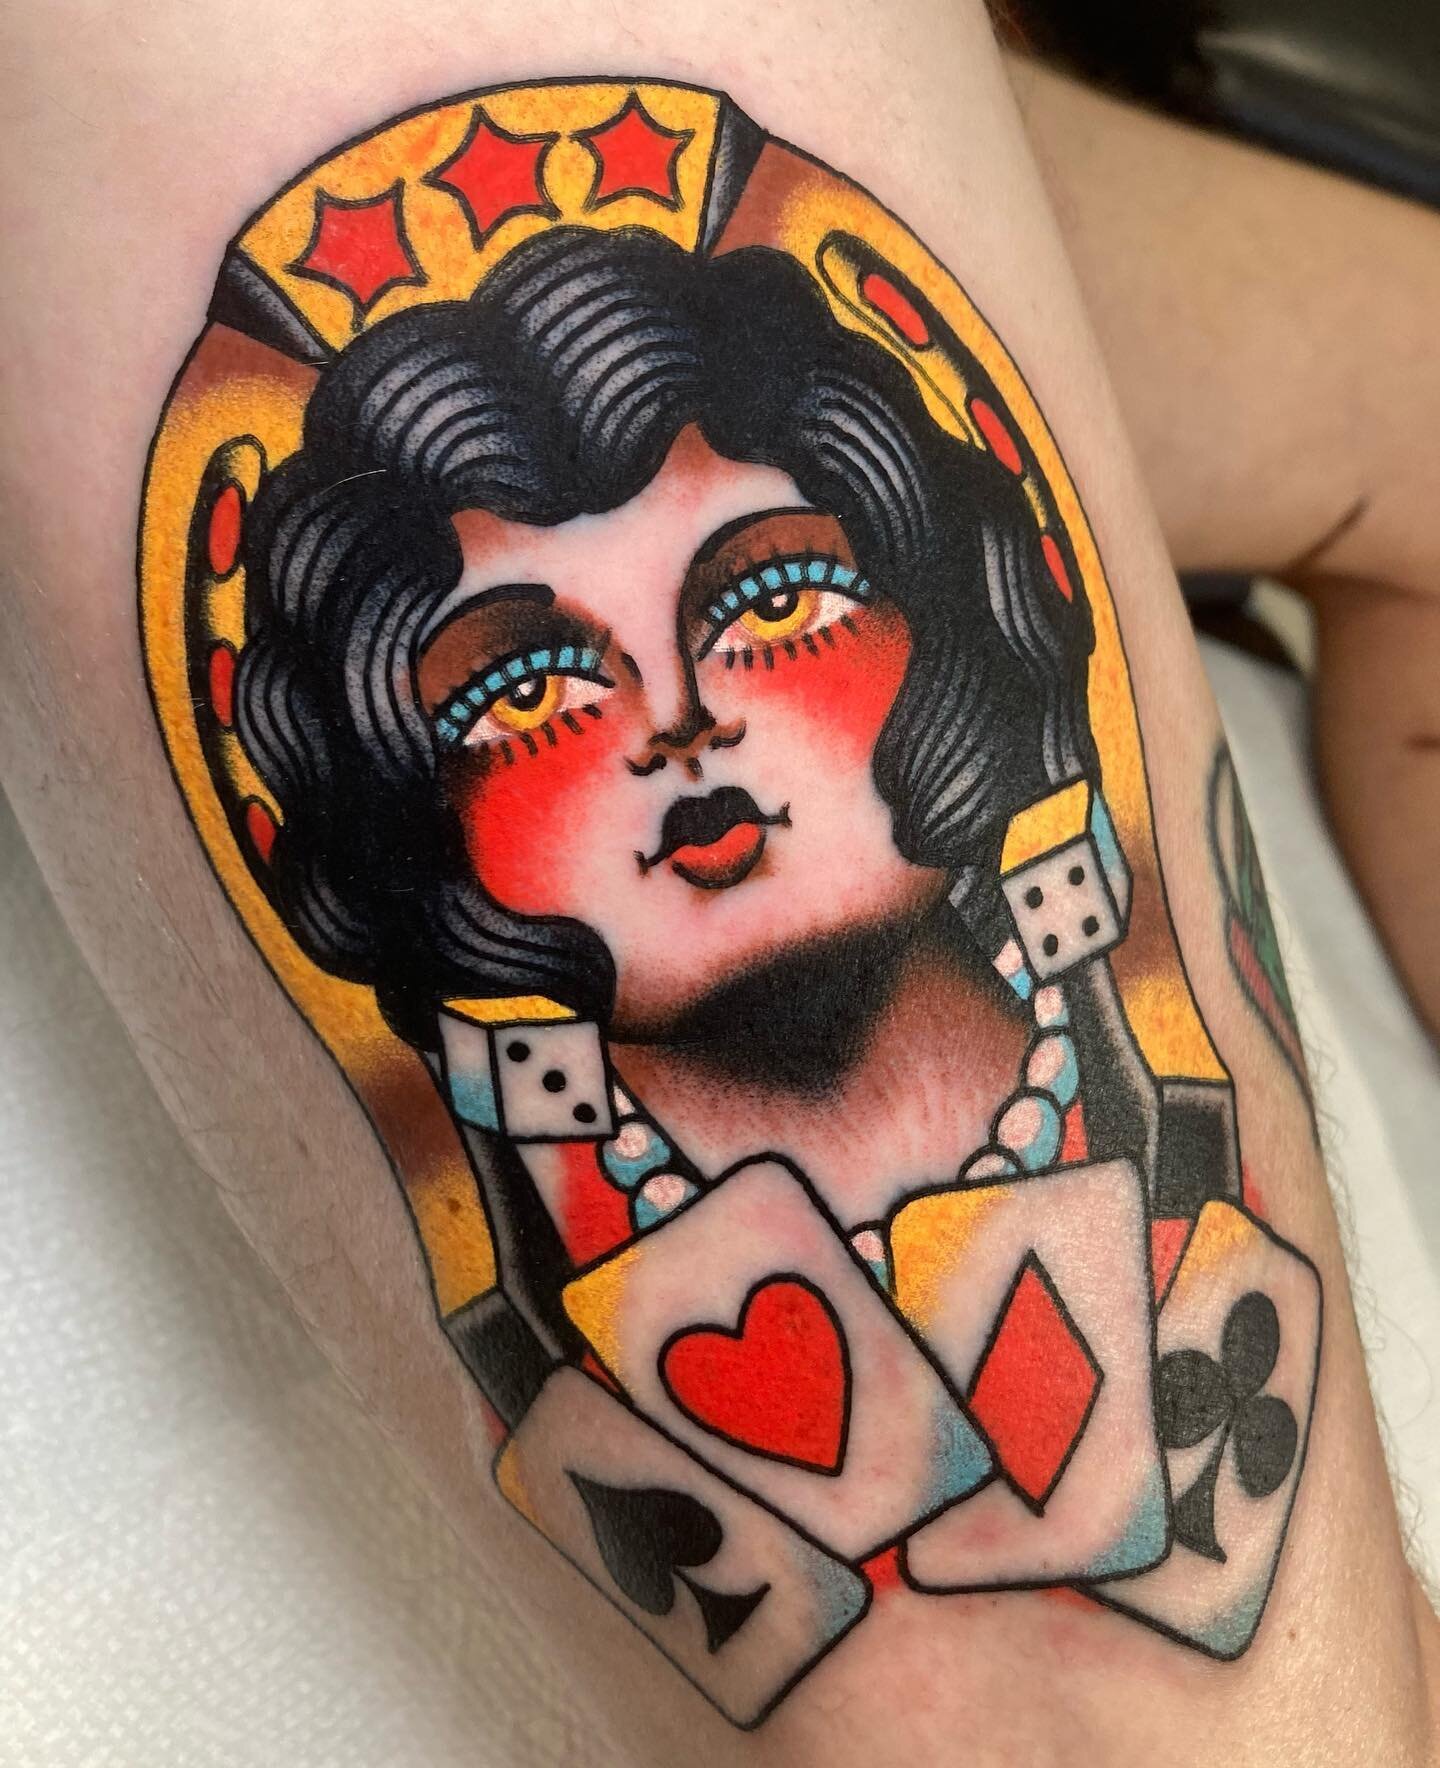 Lady Luck on one of my oldest friends, thanks Damien! 

@hotlinetattoo